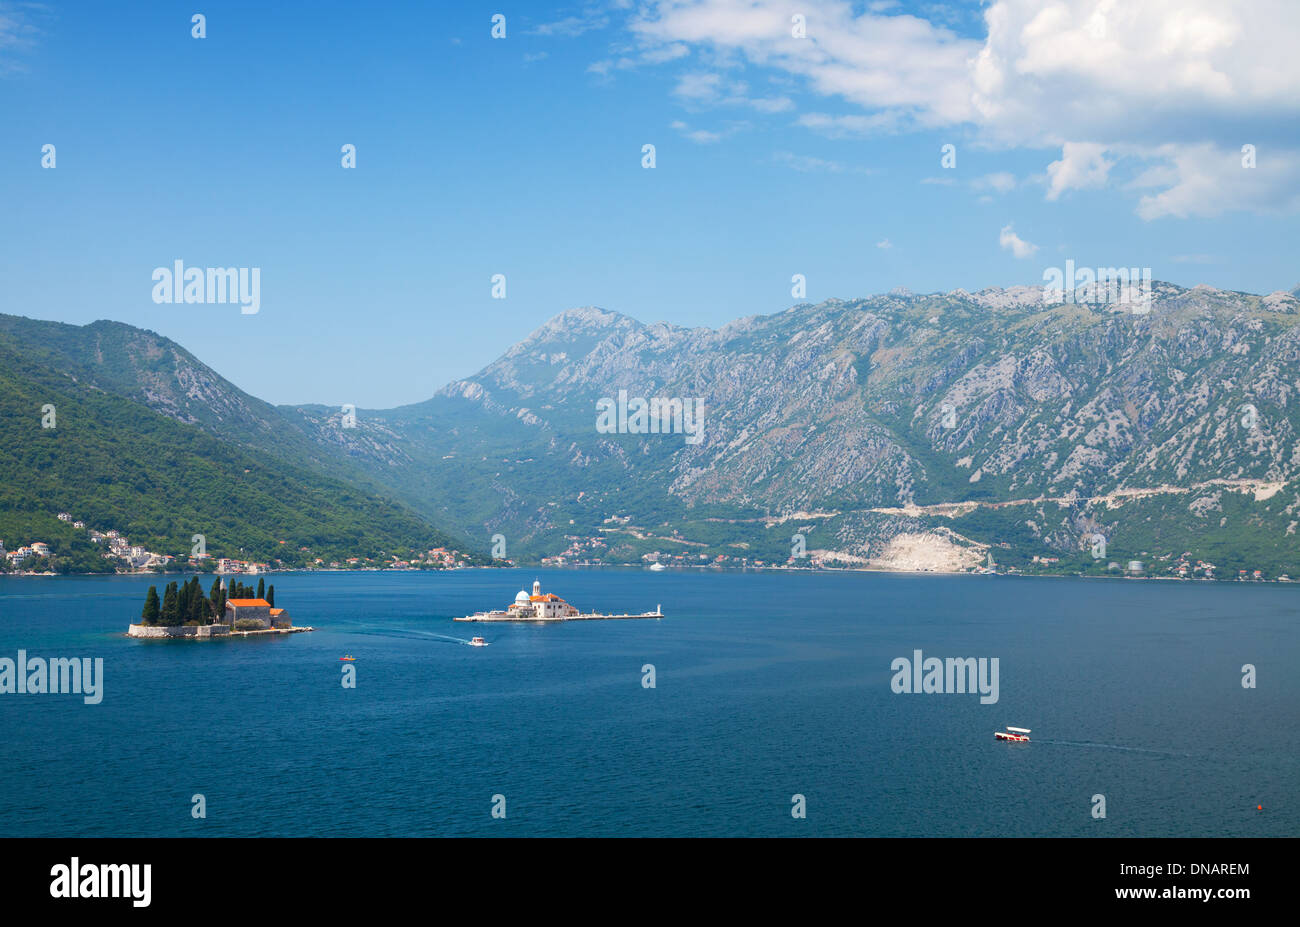 Bay of Kotor landscape with small islands and boats Stock Photo